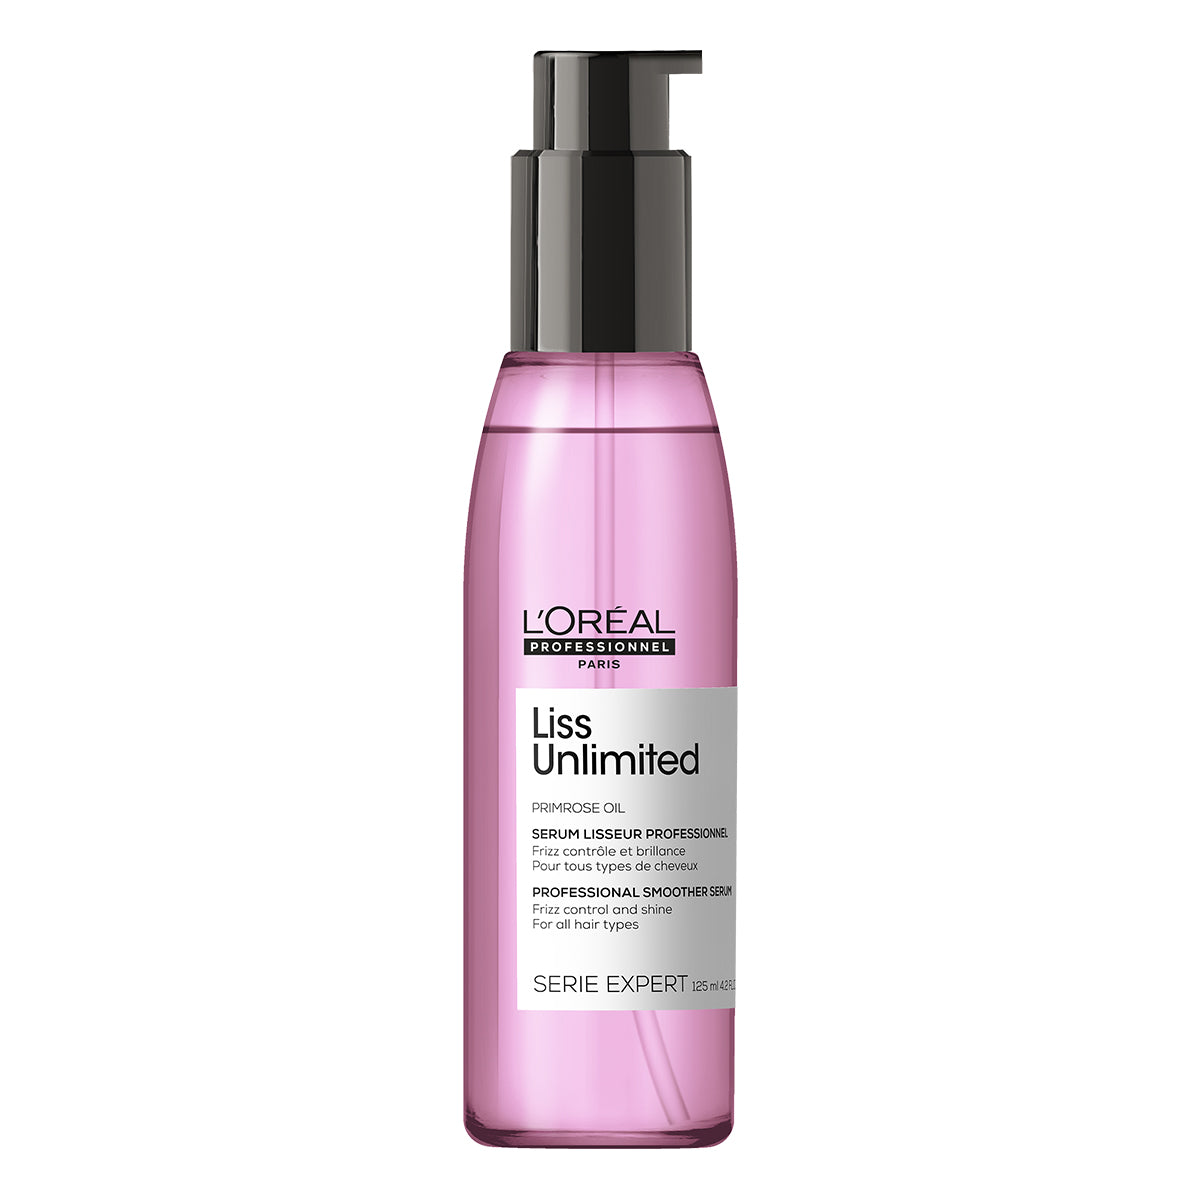 SE LISS UNLIMITED PROFESSIONAL SMOOTHER SERUM 125 ML